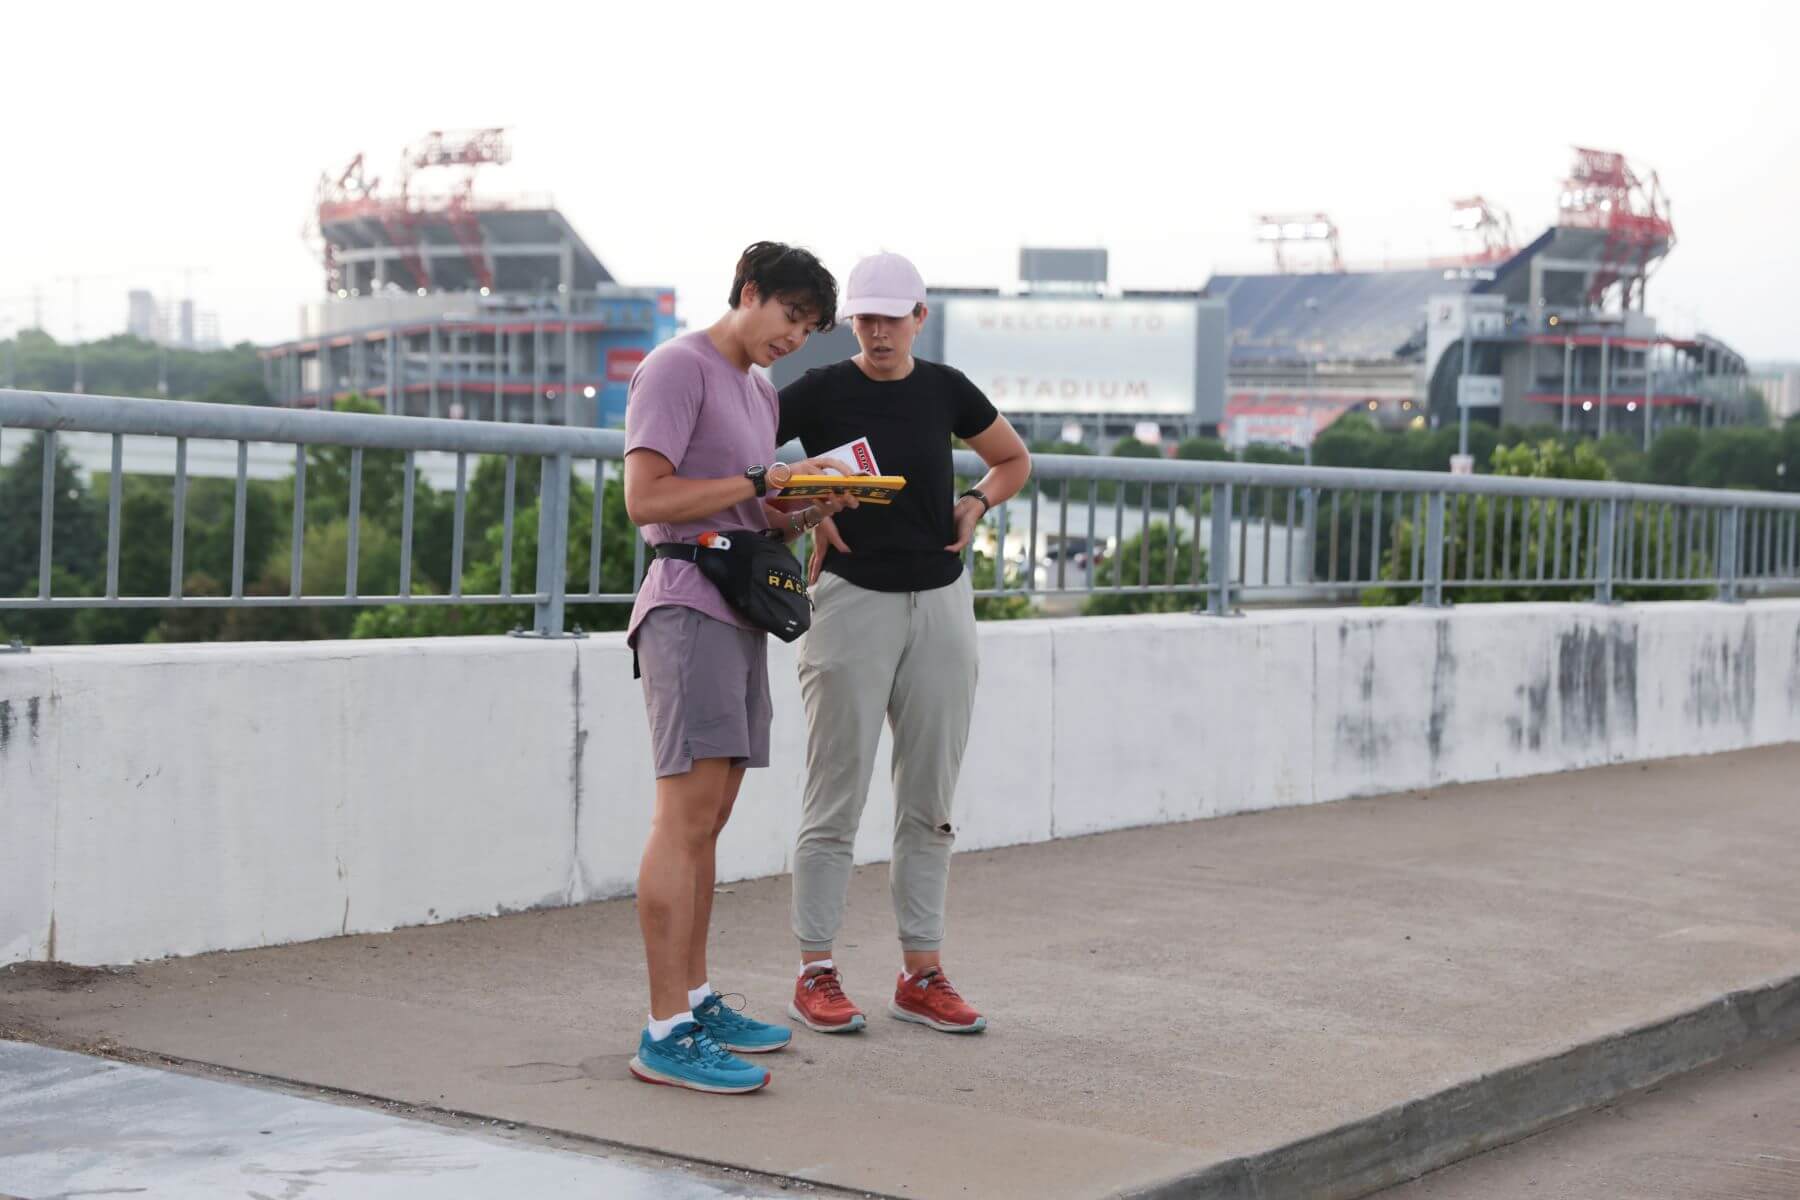 Derek Xiao and Claire Rehfuss read a clue while racing in the finale of 'The Amazing Race' Season 34 on CBS. Derek wears a light purple shirt, gray shorts, blue shoes, and a black fanny pack. Claire wears a black shirt, light gray pants, red shoes, and a light pink baseball cap.